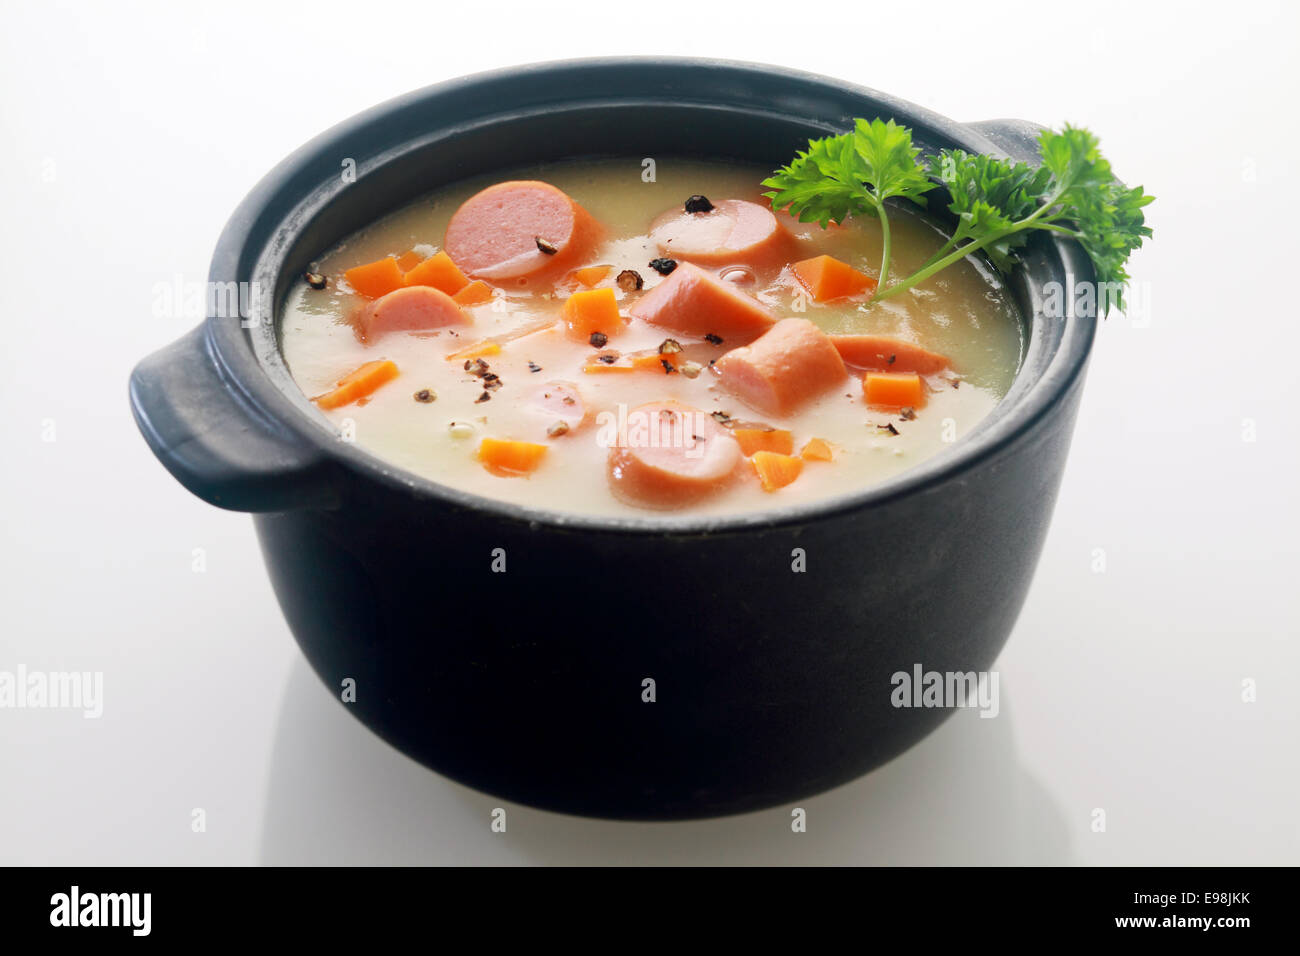 Appetizing Main Course Soup Dish Recipe on Black Pot Isolated on Gray Background. Stock Photo